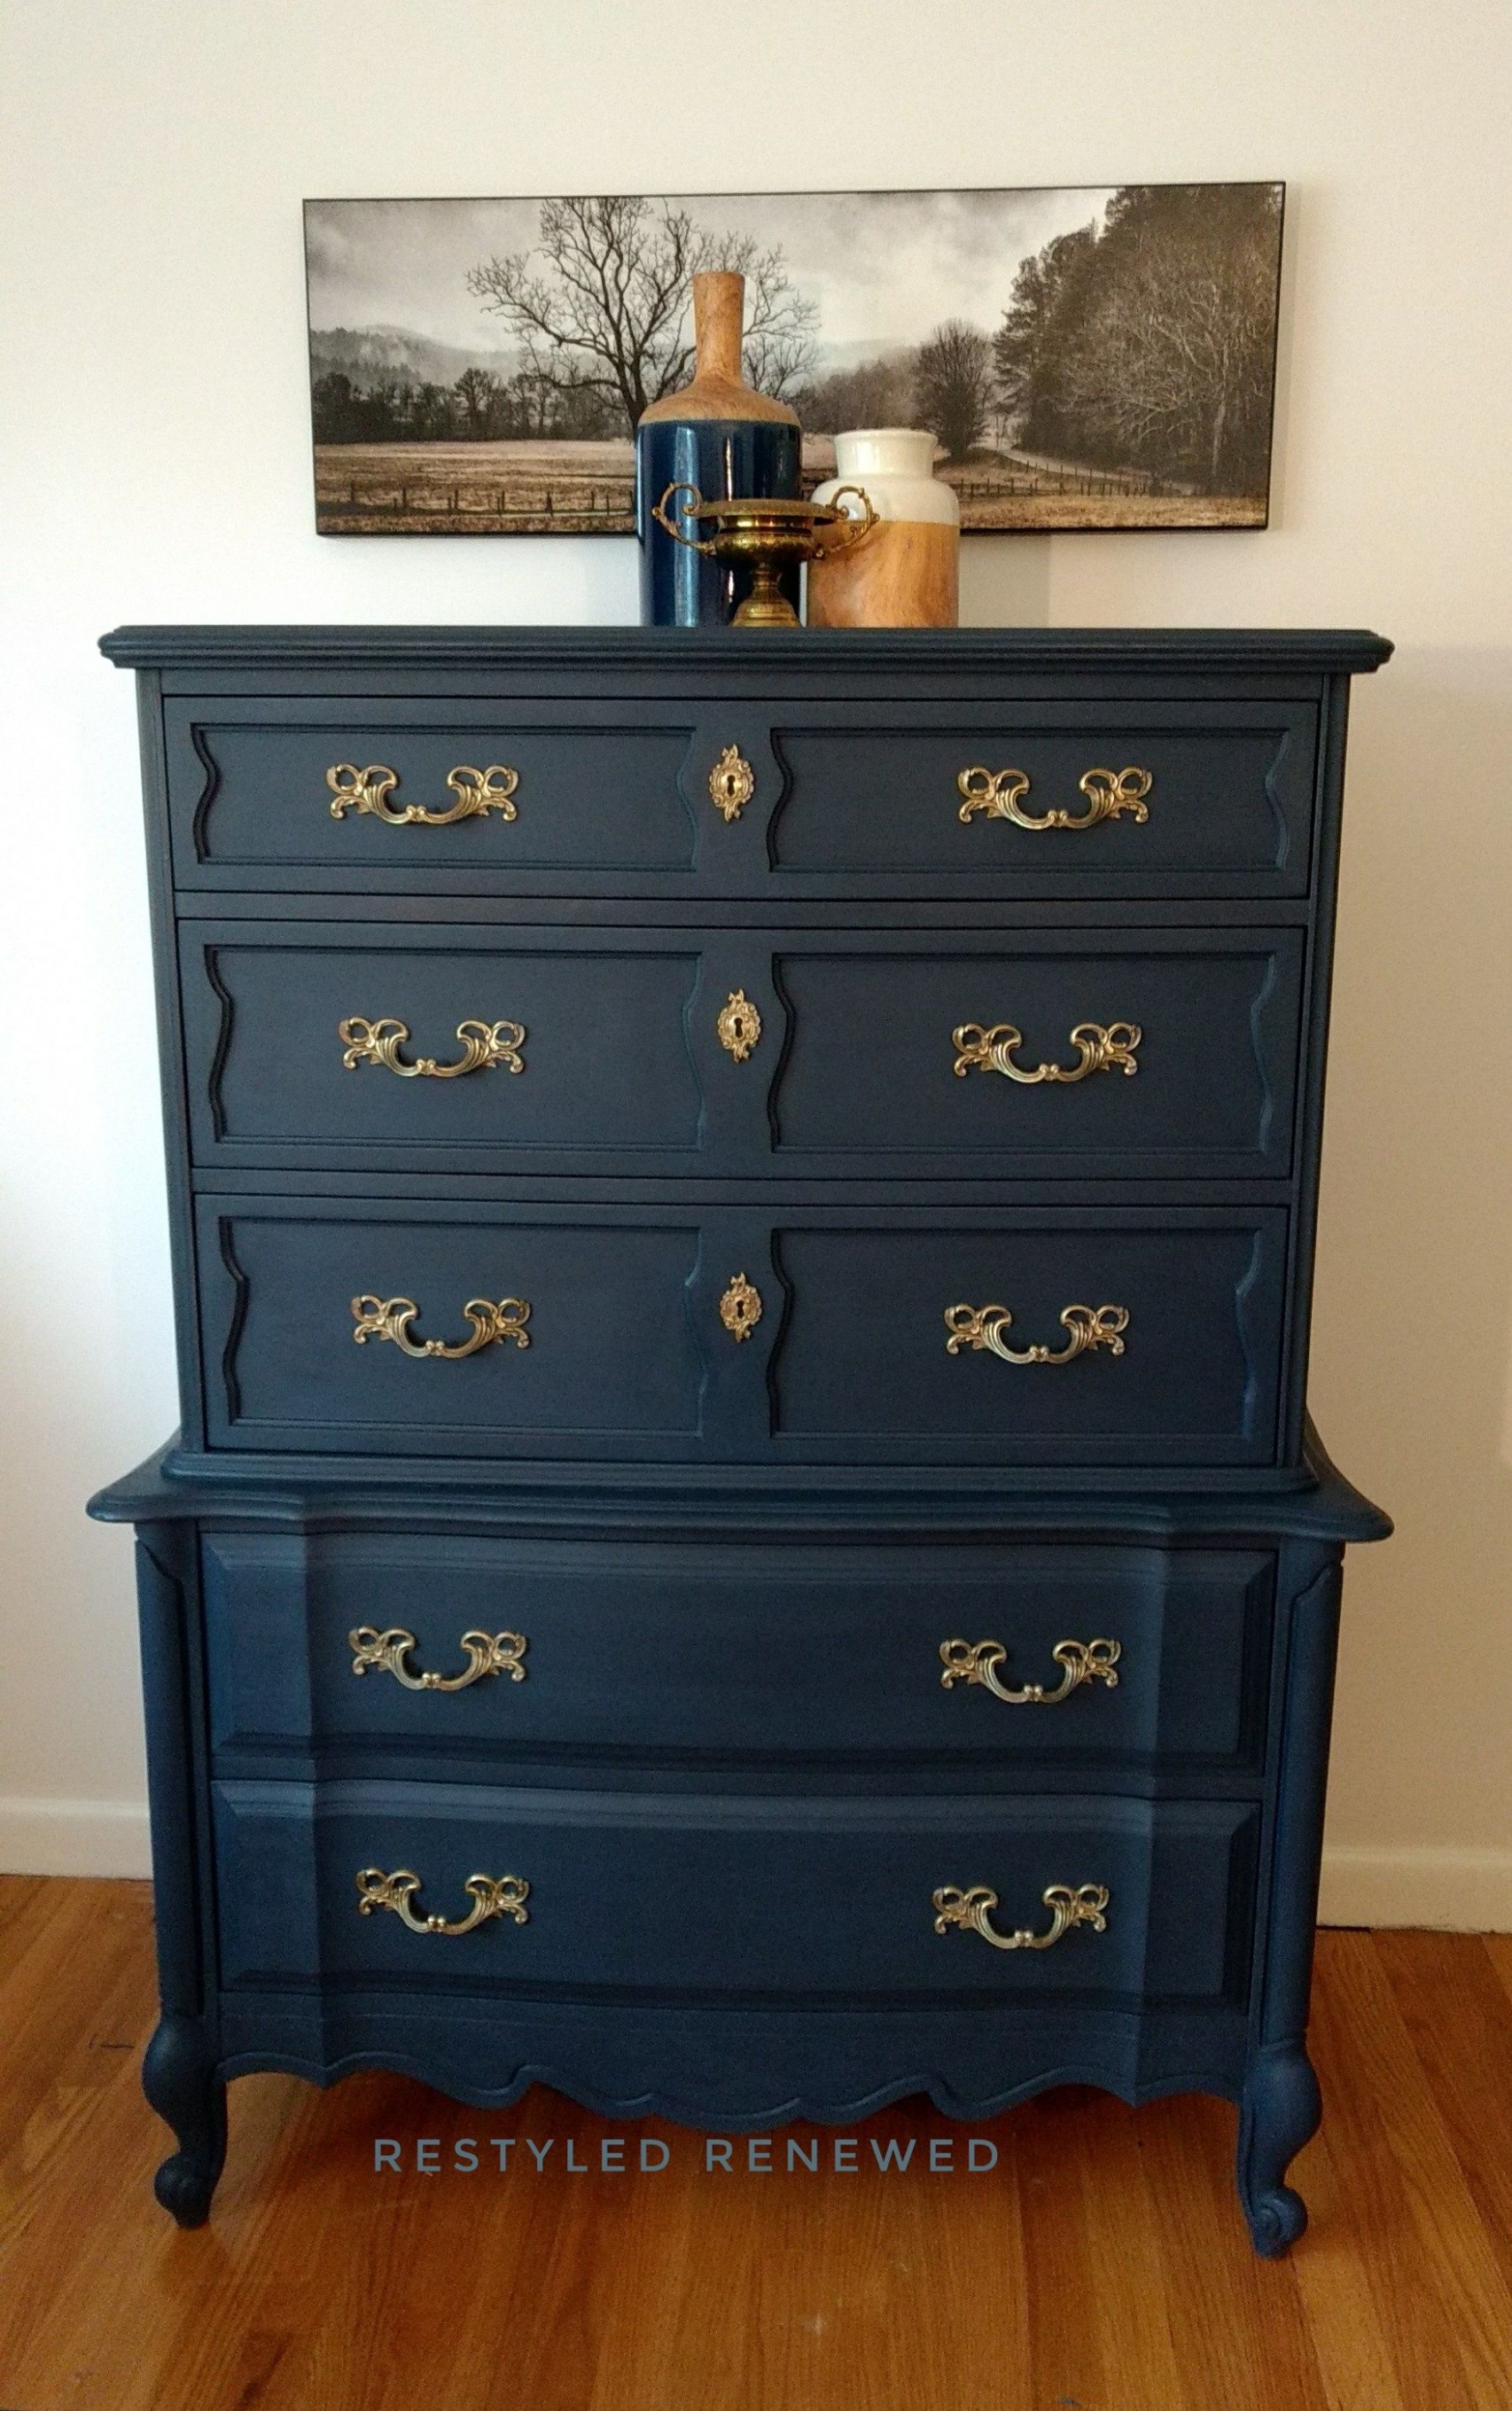 Single Post | Annie Sloan Painted Furniture, Painting Old ..